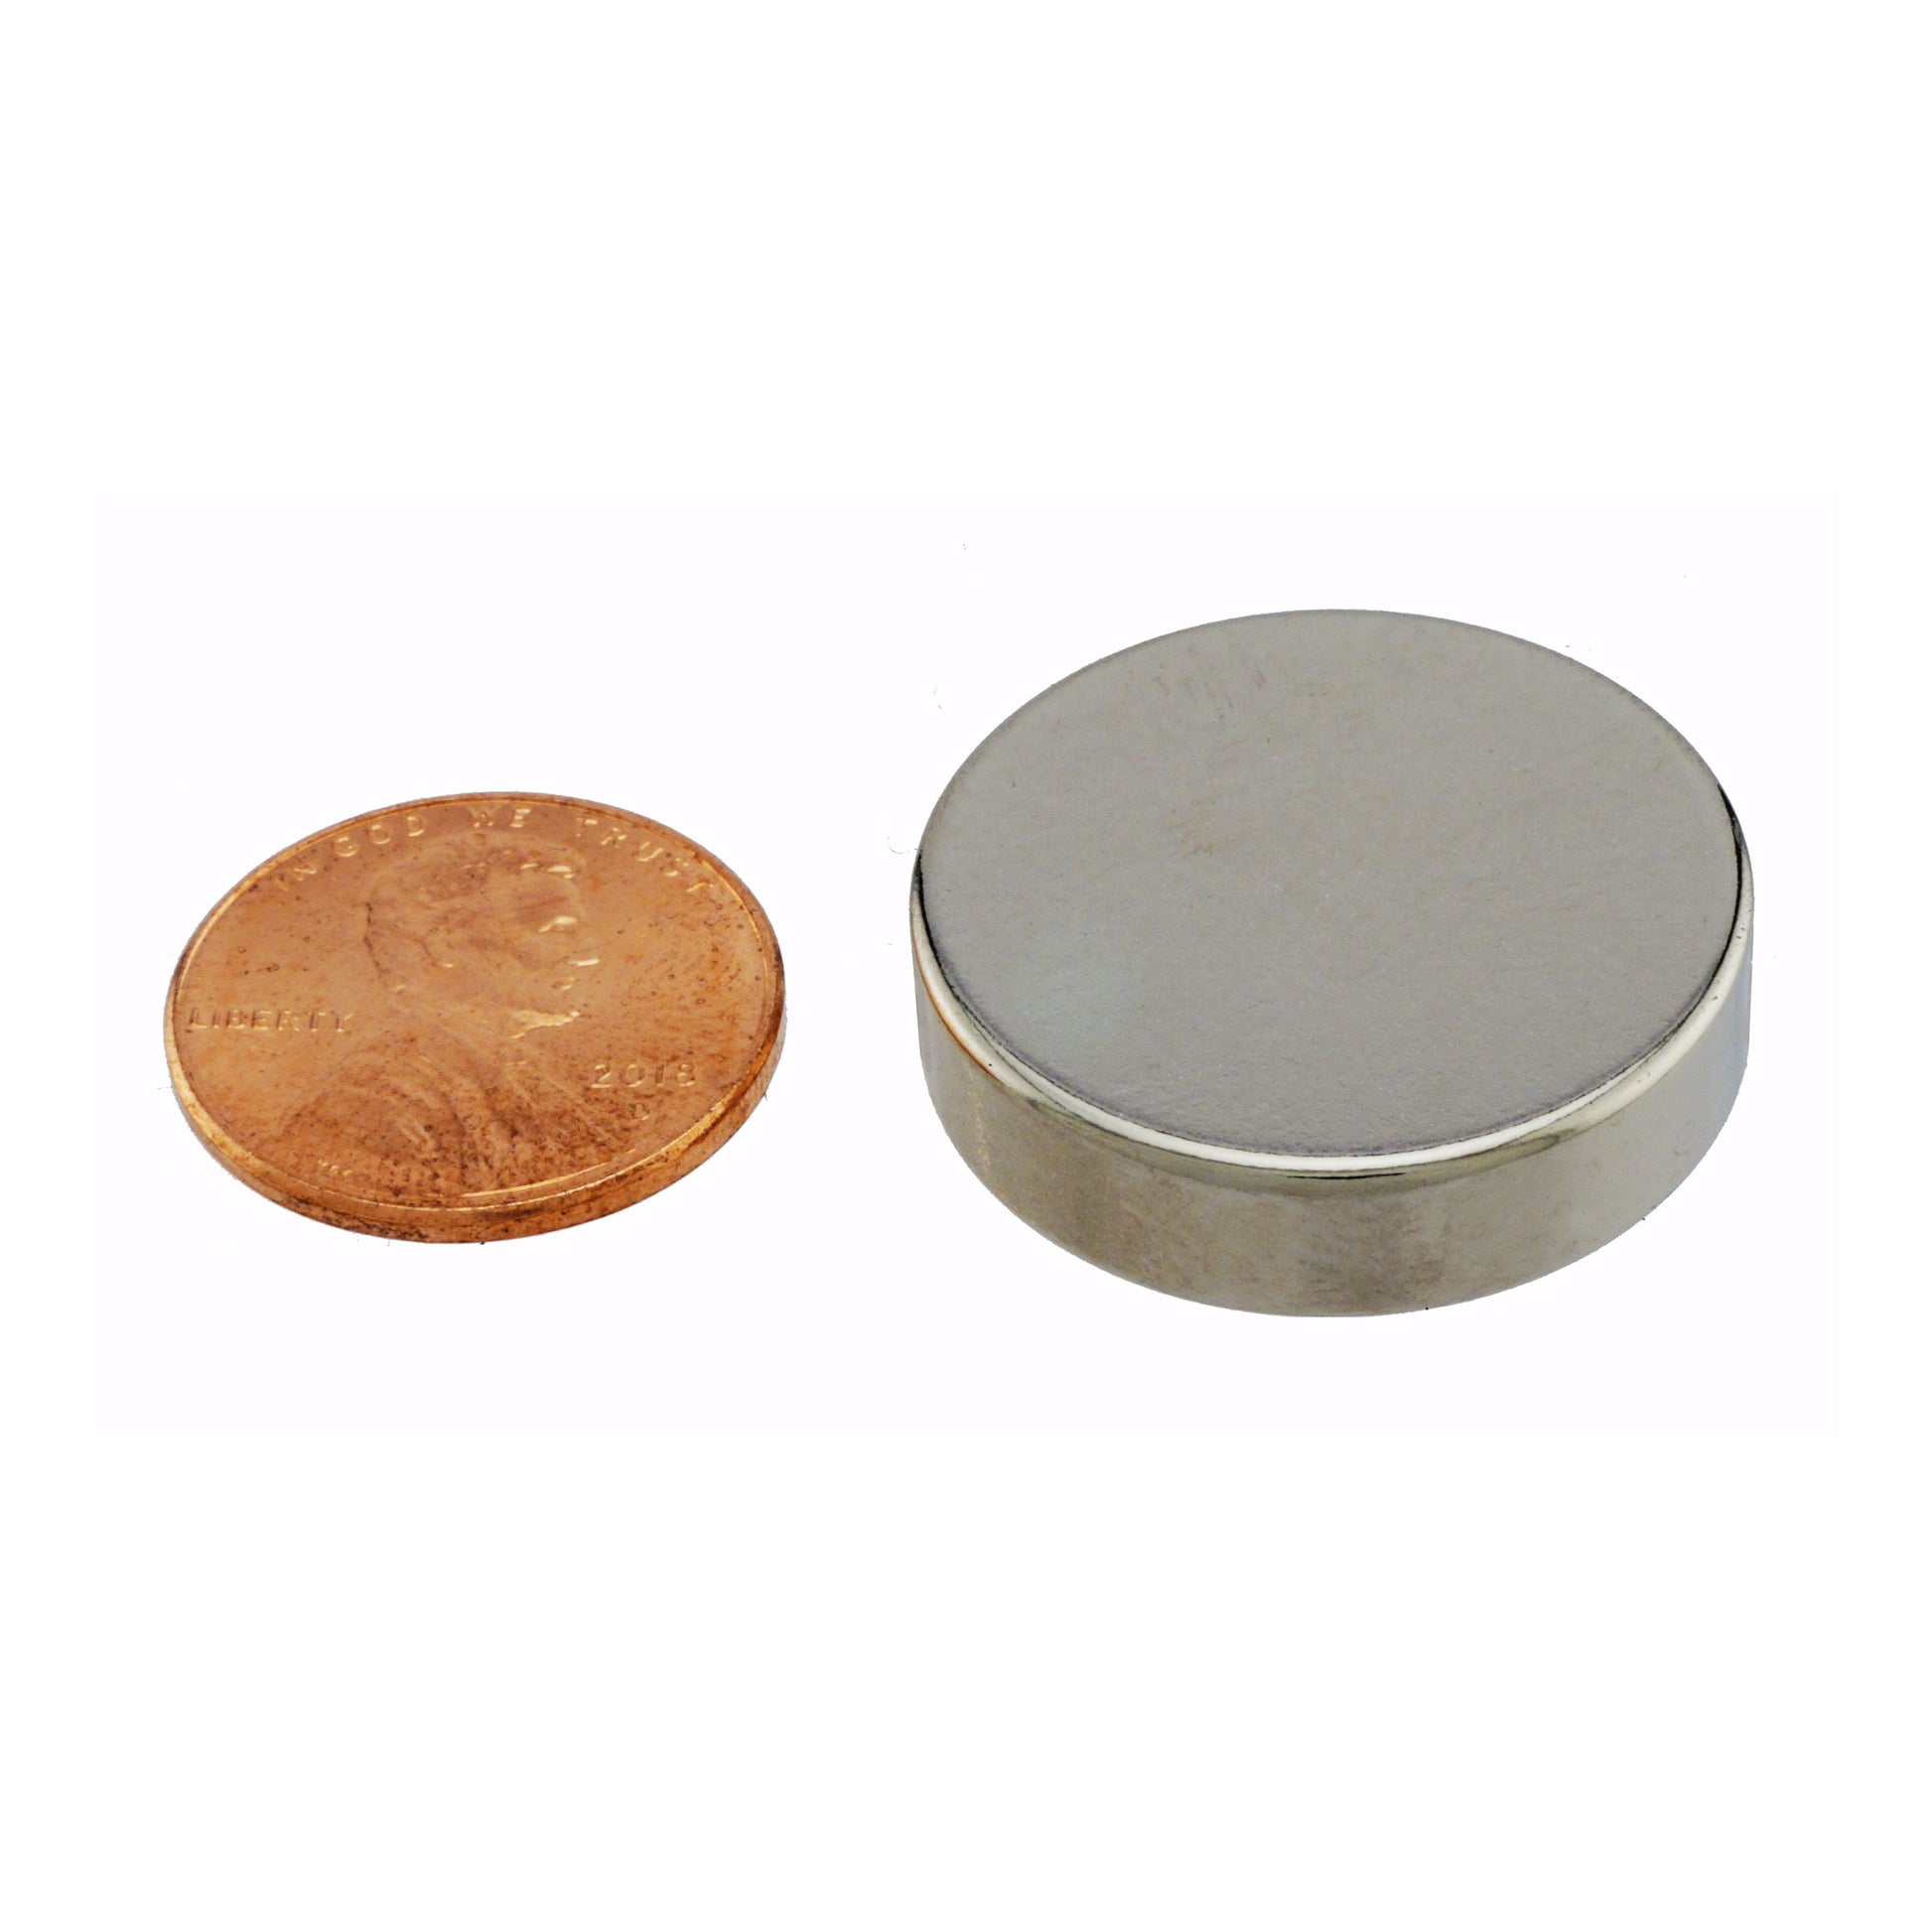 Load image into Gallery viewer, ND125N-35 Neodymium Disc Magnet - Compared to Penny for Size Reference